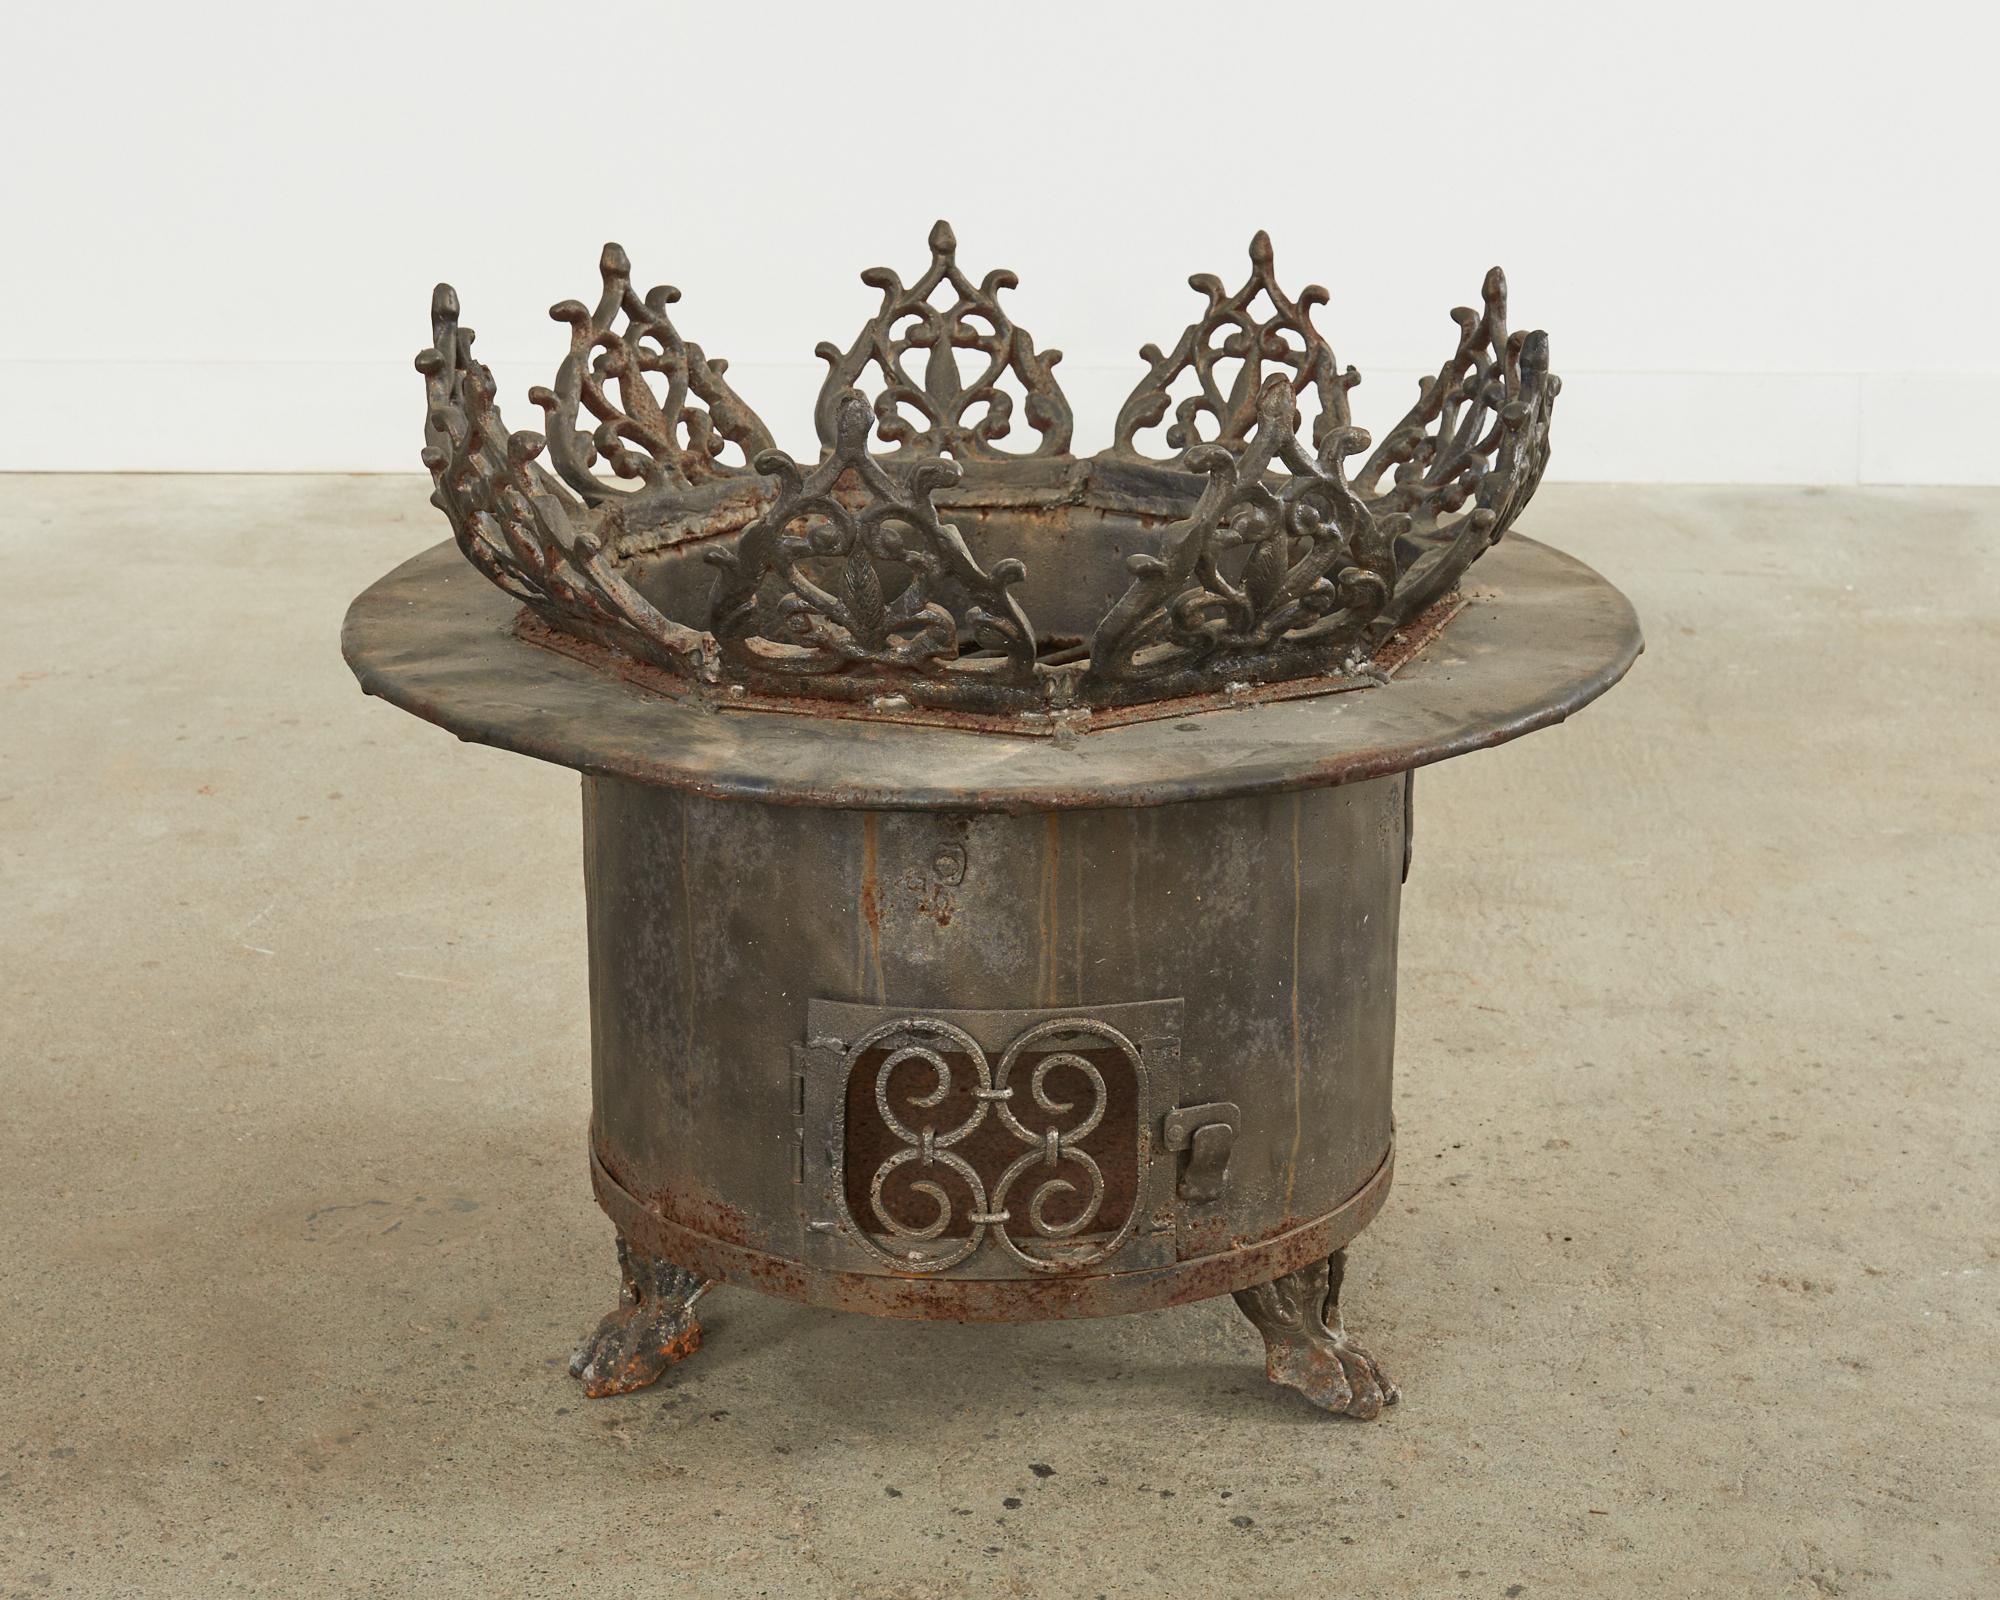 Fantastic custom made wrought iron brazier fire pit or chimnea. The round pit features a decorative border on top of scrolled acanthus appearing like flames. The pit is supported by baroque style lions paw feet. The open top measures 18 inches